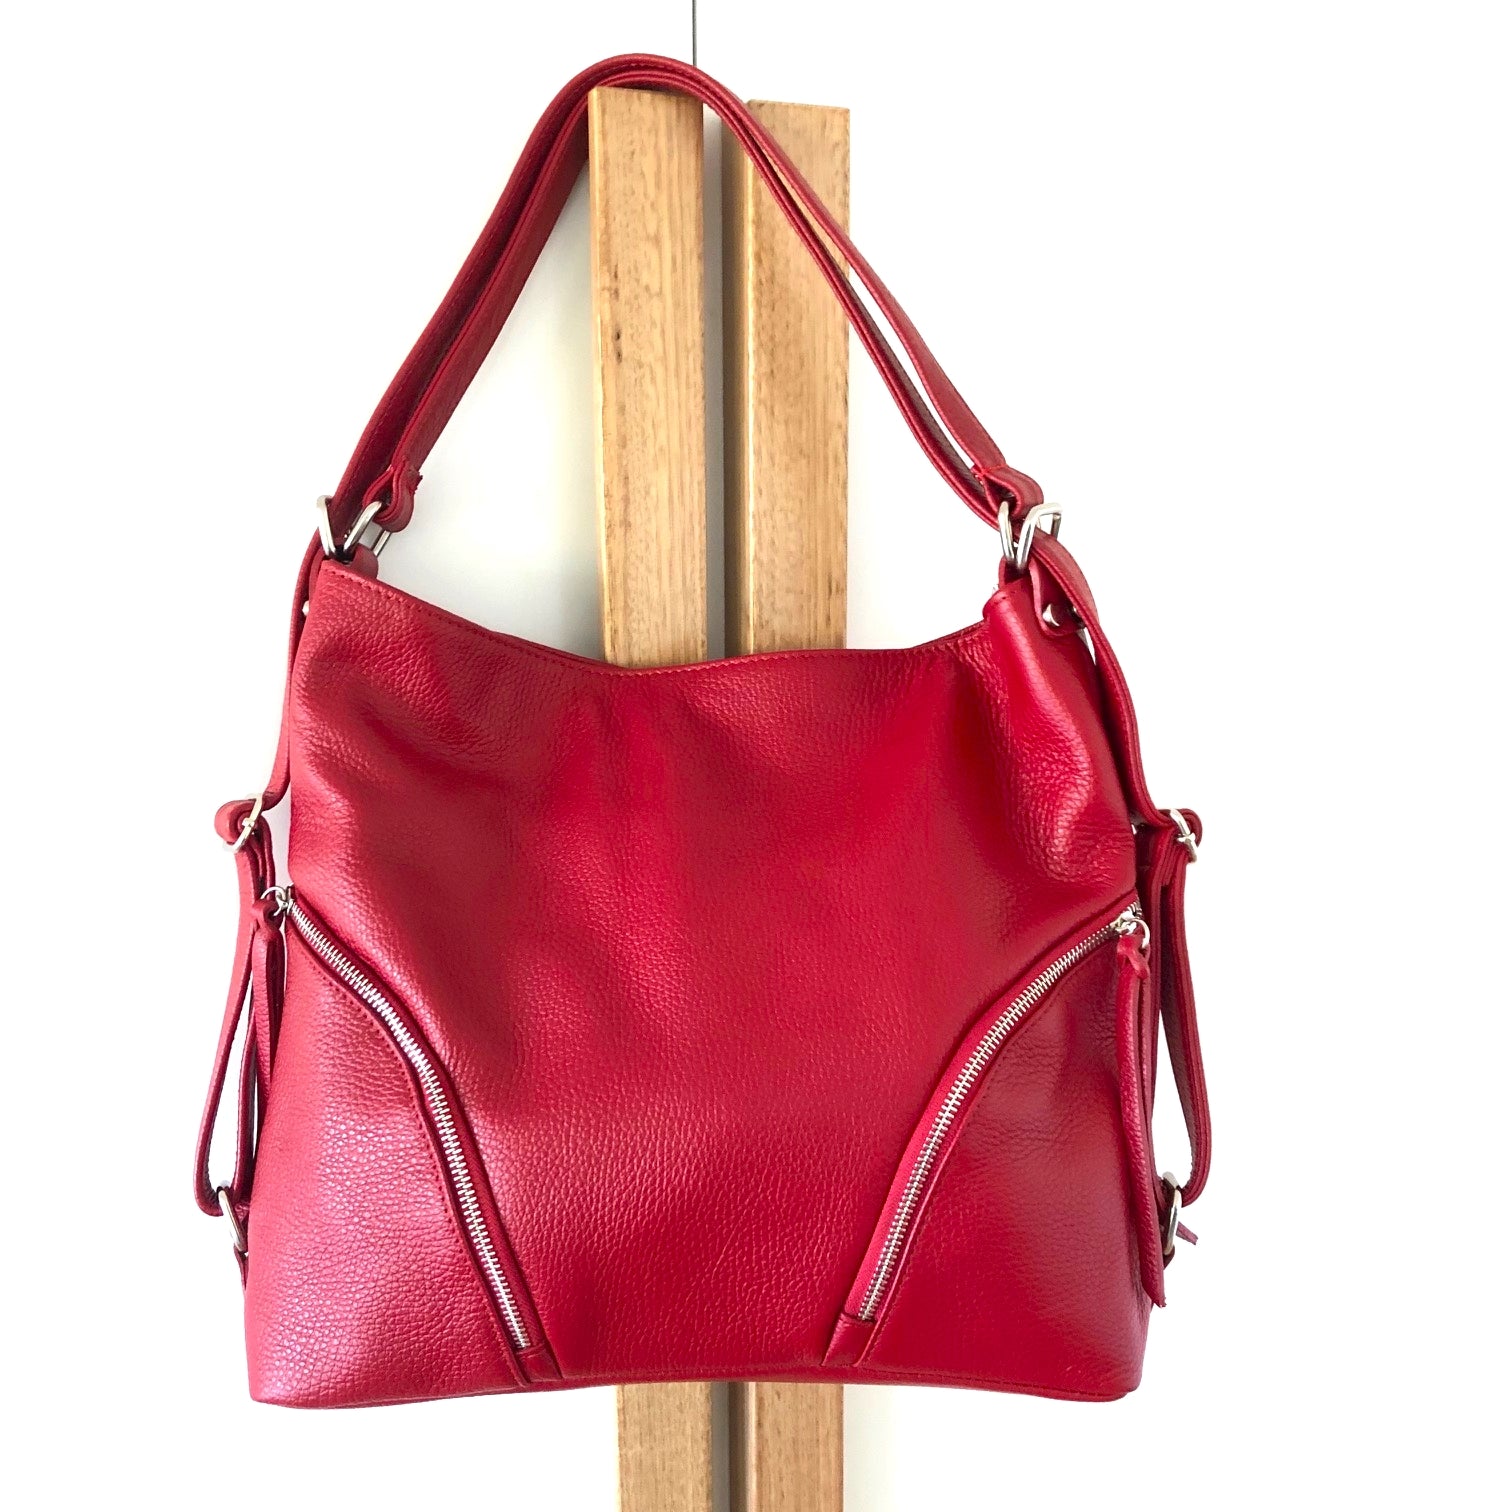 Full view of the Marissa bag in red